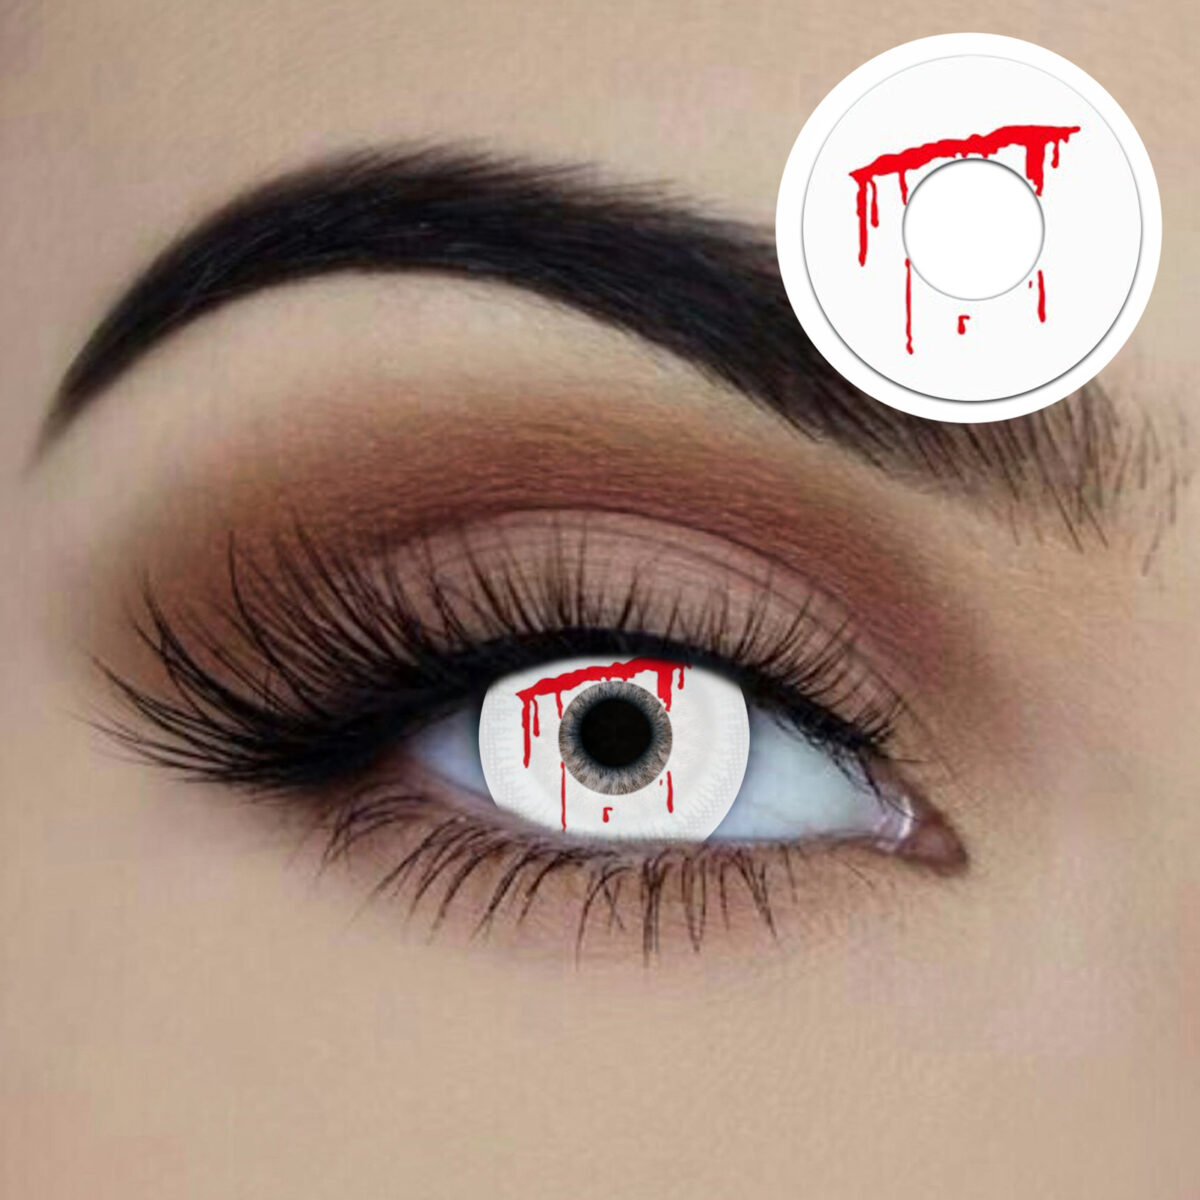 slasher coloured contact lenses 12 months disposable starry eyed sunbury costumes